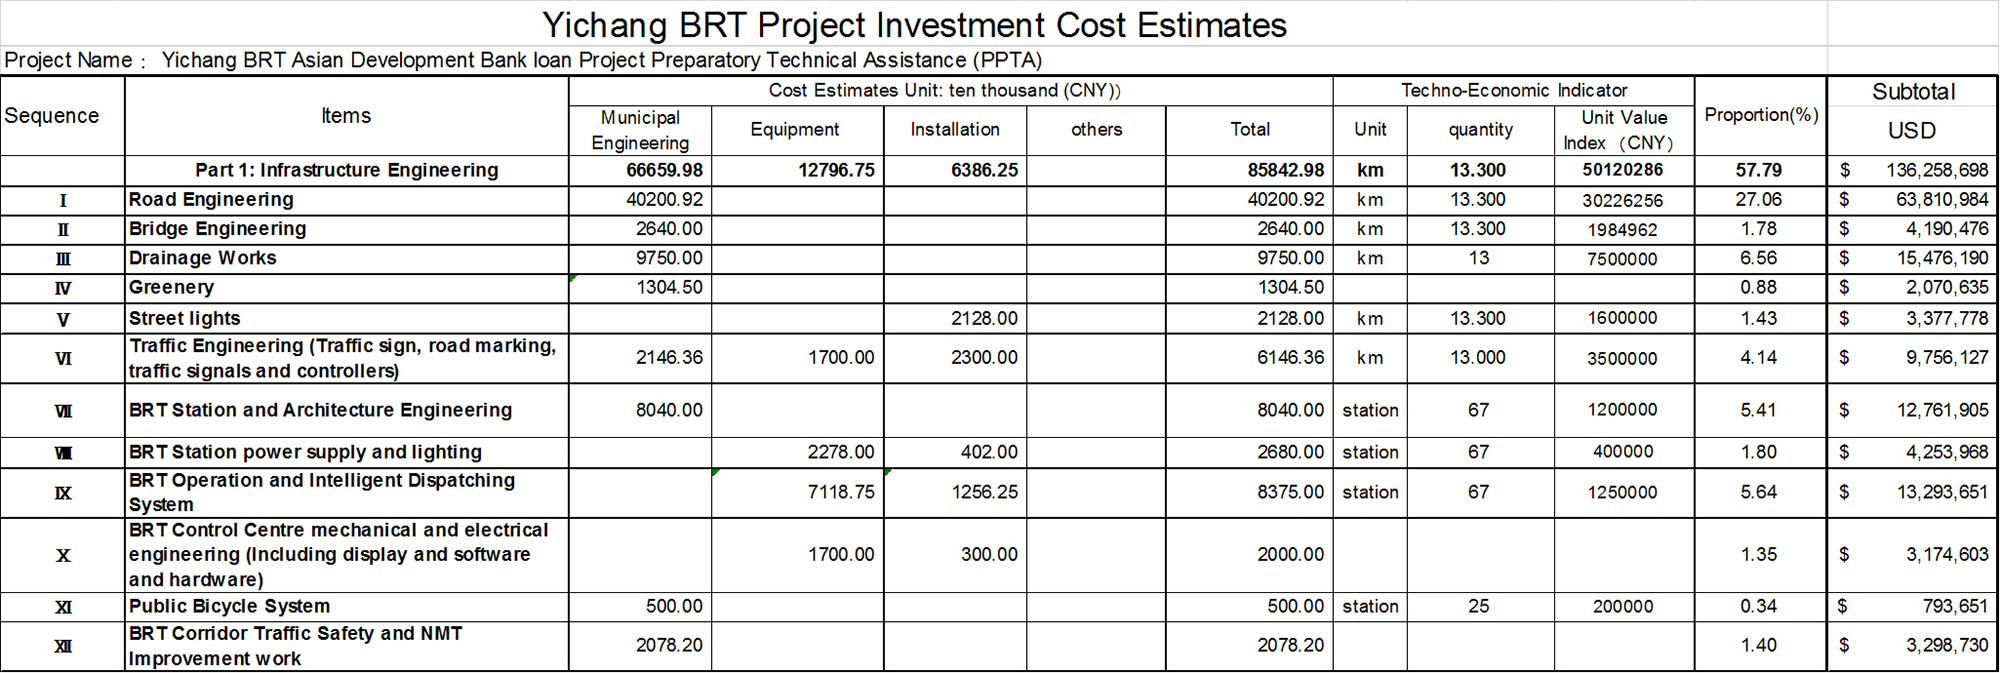 Fig. 21.12 A simplified budget for Yichang, China’s BRT demonstrates a sample cost breakdown. A complete budget can be found in Appendix B.